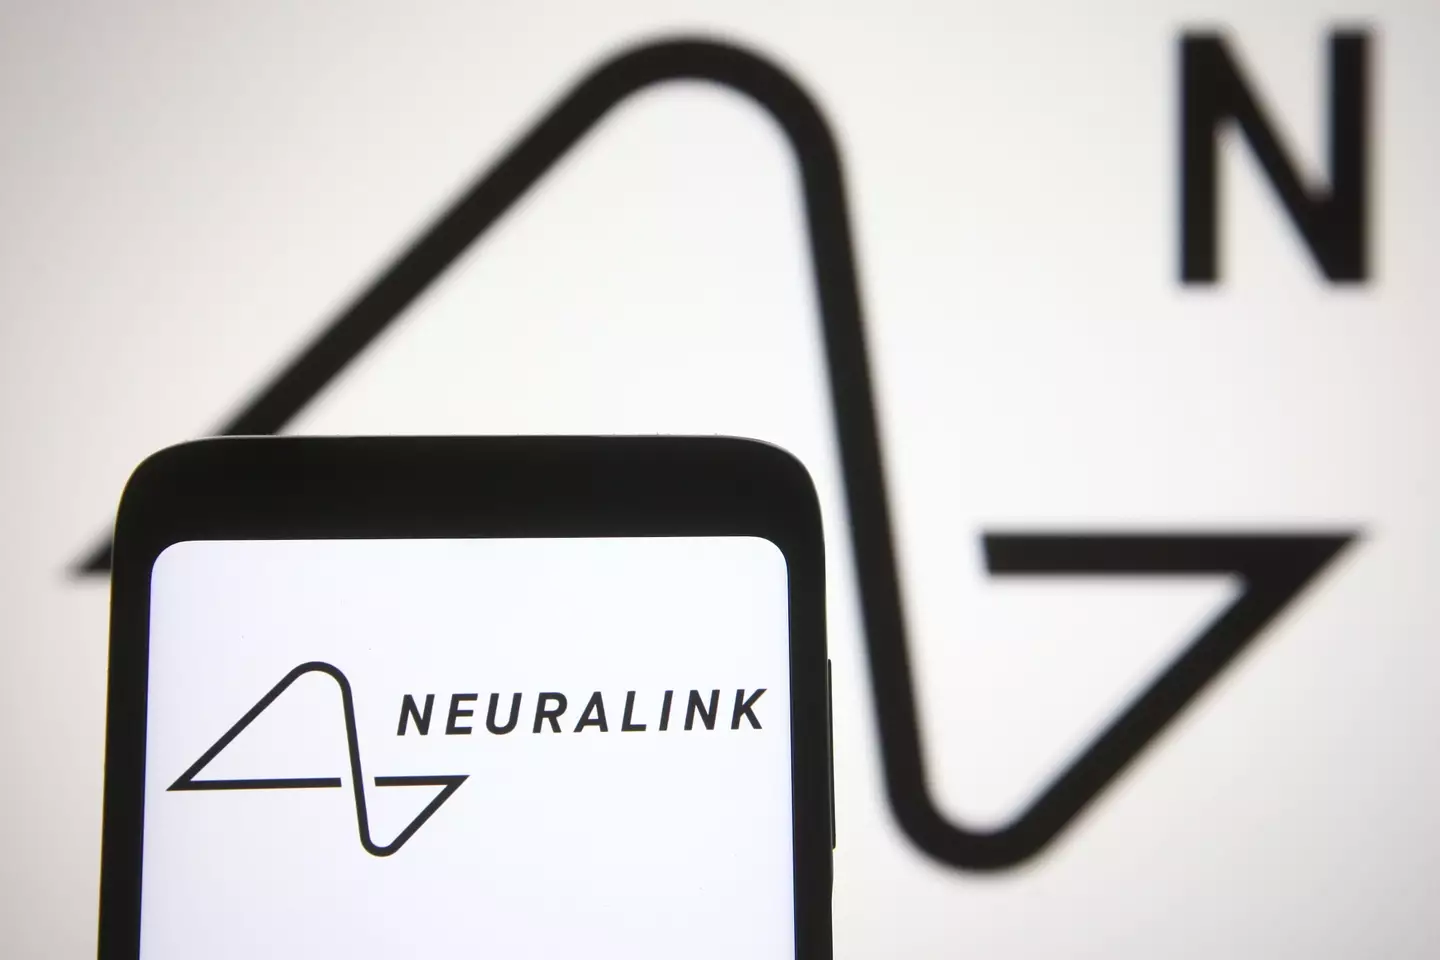 Neuralink is aiming to make a brain implant that will let people control technology telepathically.